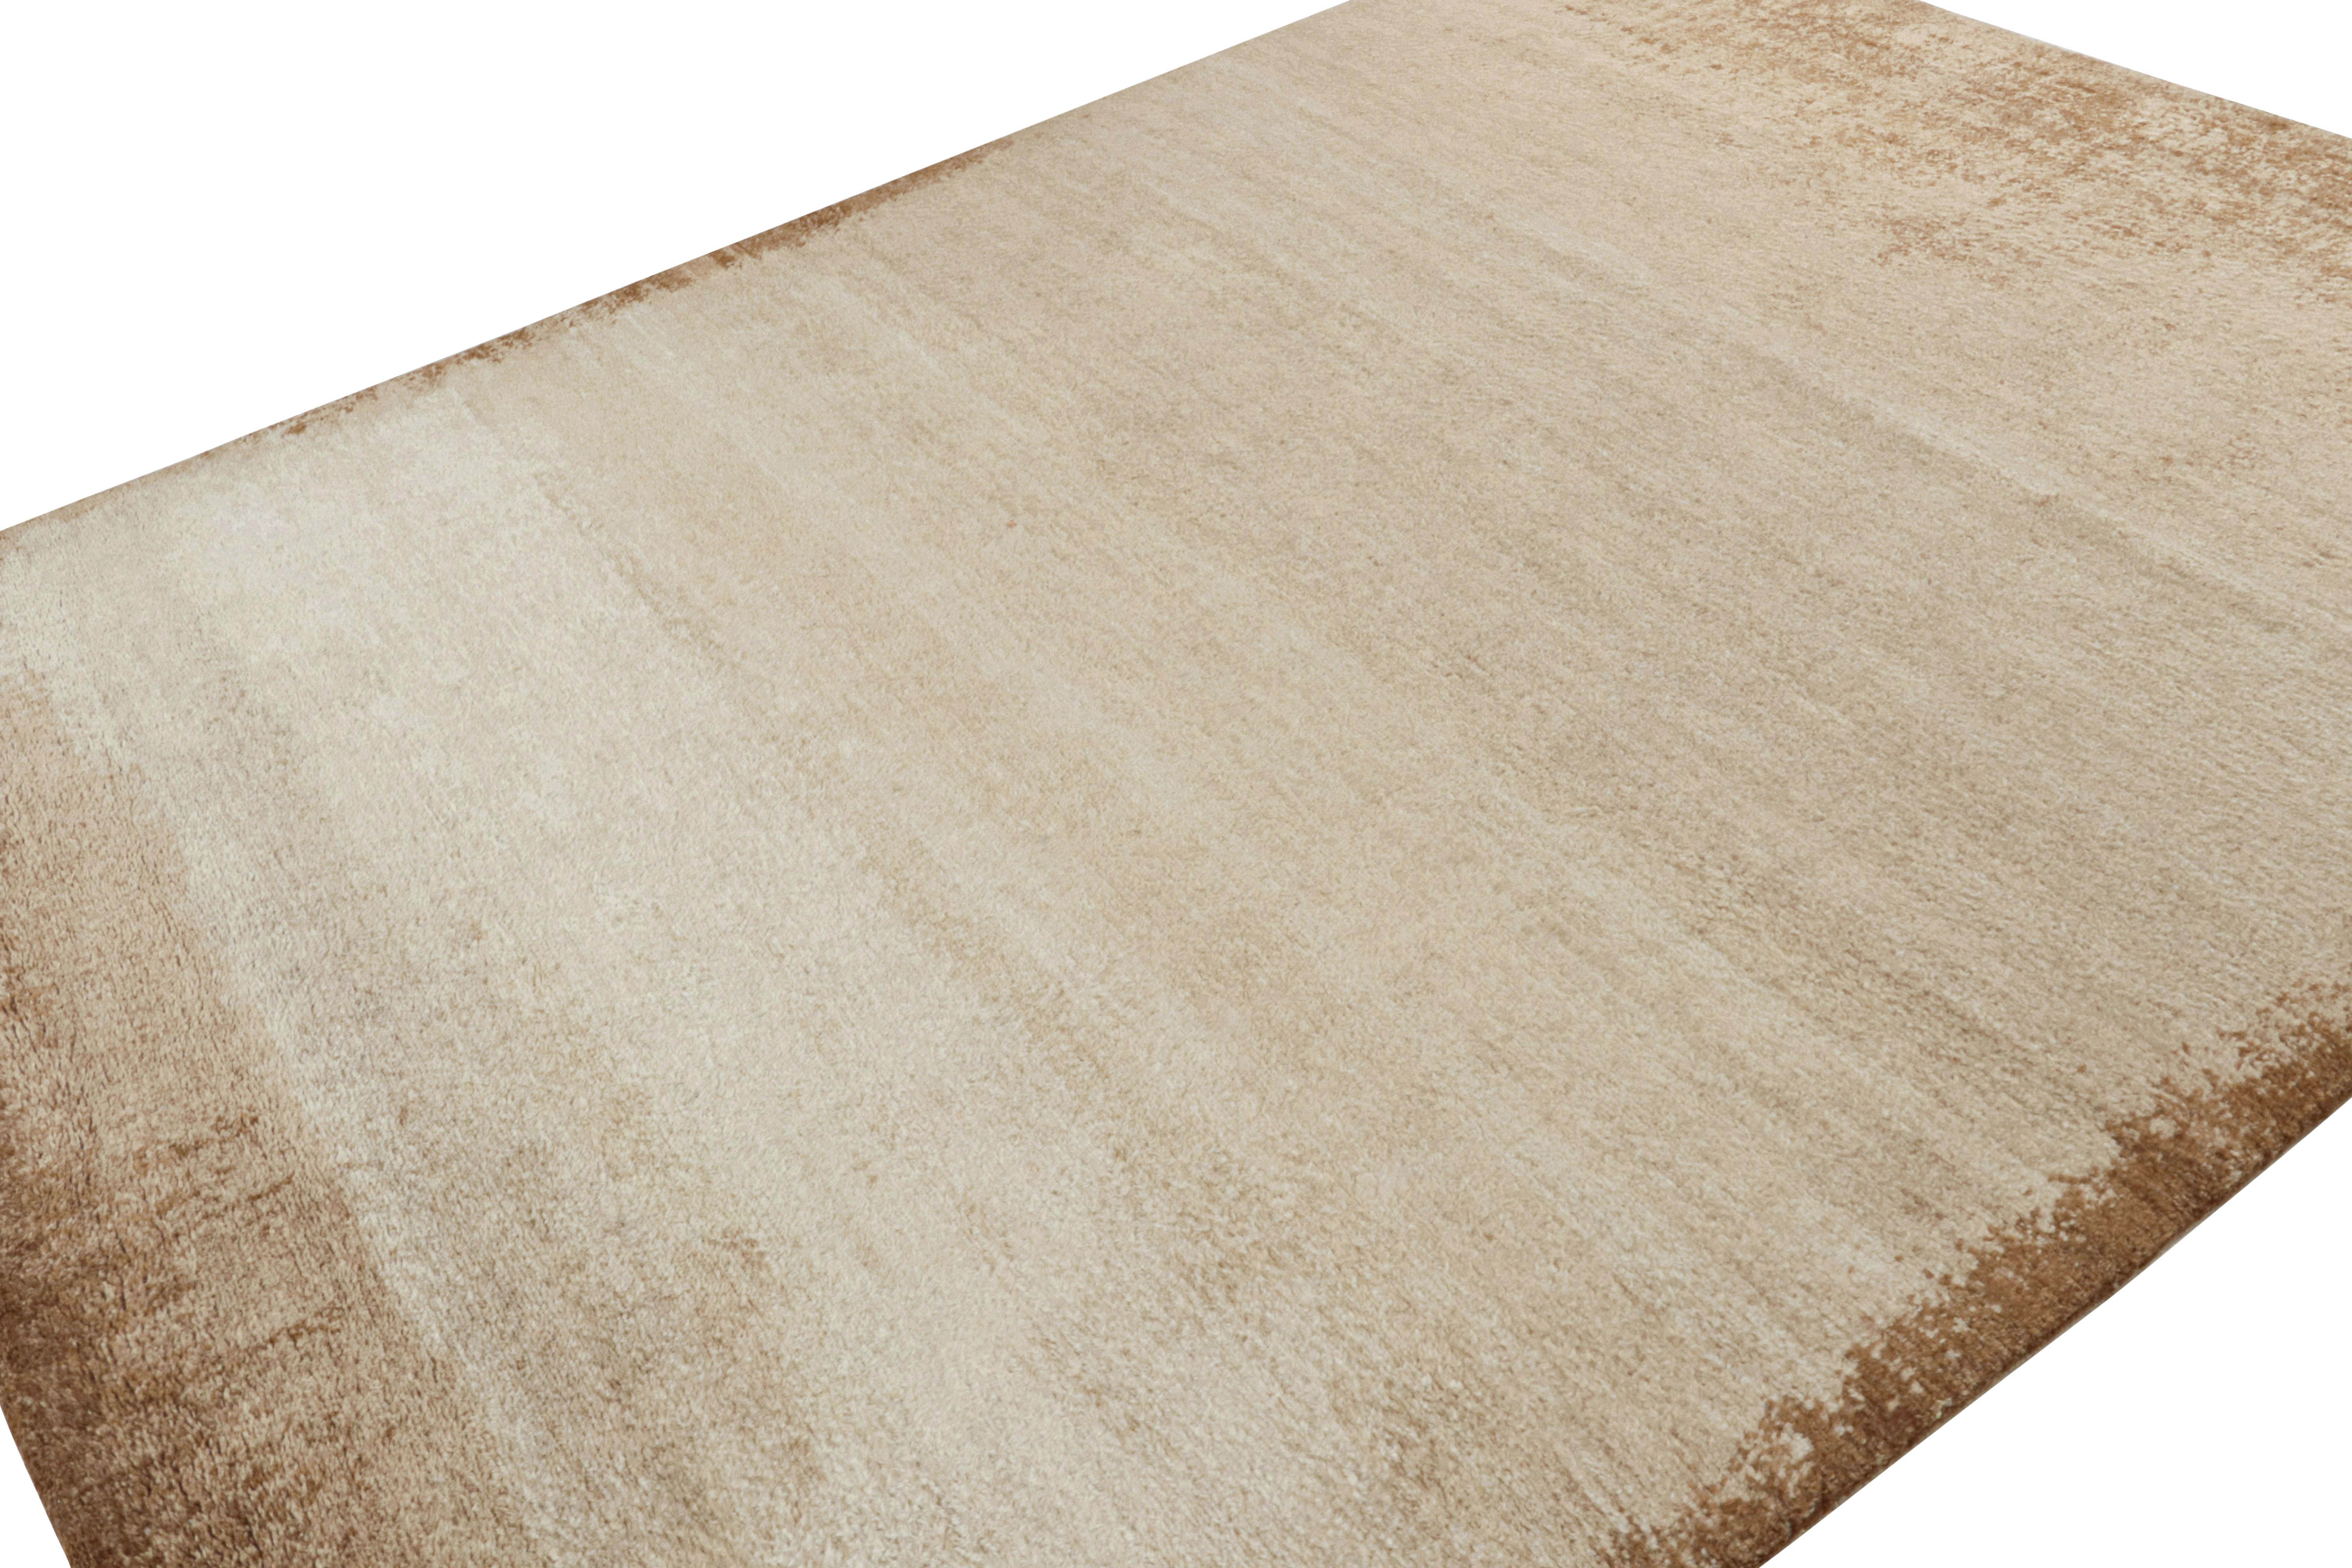 Hand-knotted in a luxurious pashmina, this 8x10 textural high-pile rug is a simple piece of neutrals and earth tones. 

On the Design: 

Keen eyes will admire this neutral rug with a lush, high-pile texture that invites one to walk on and admire